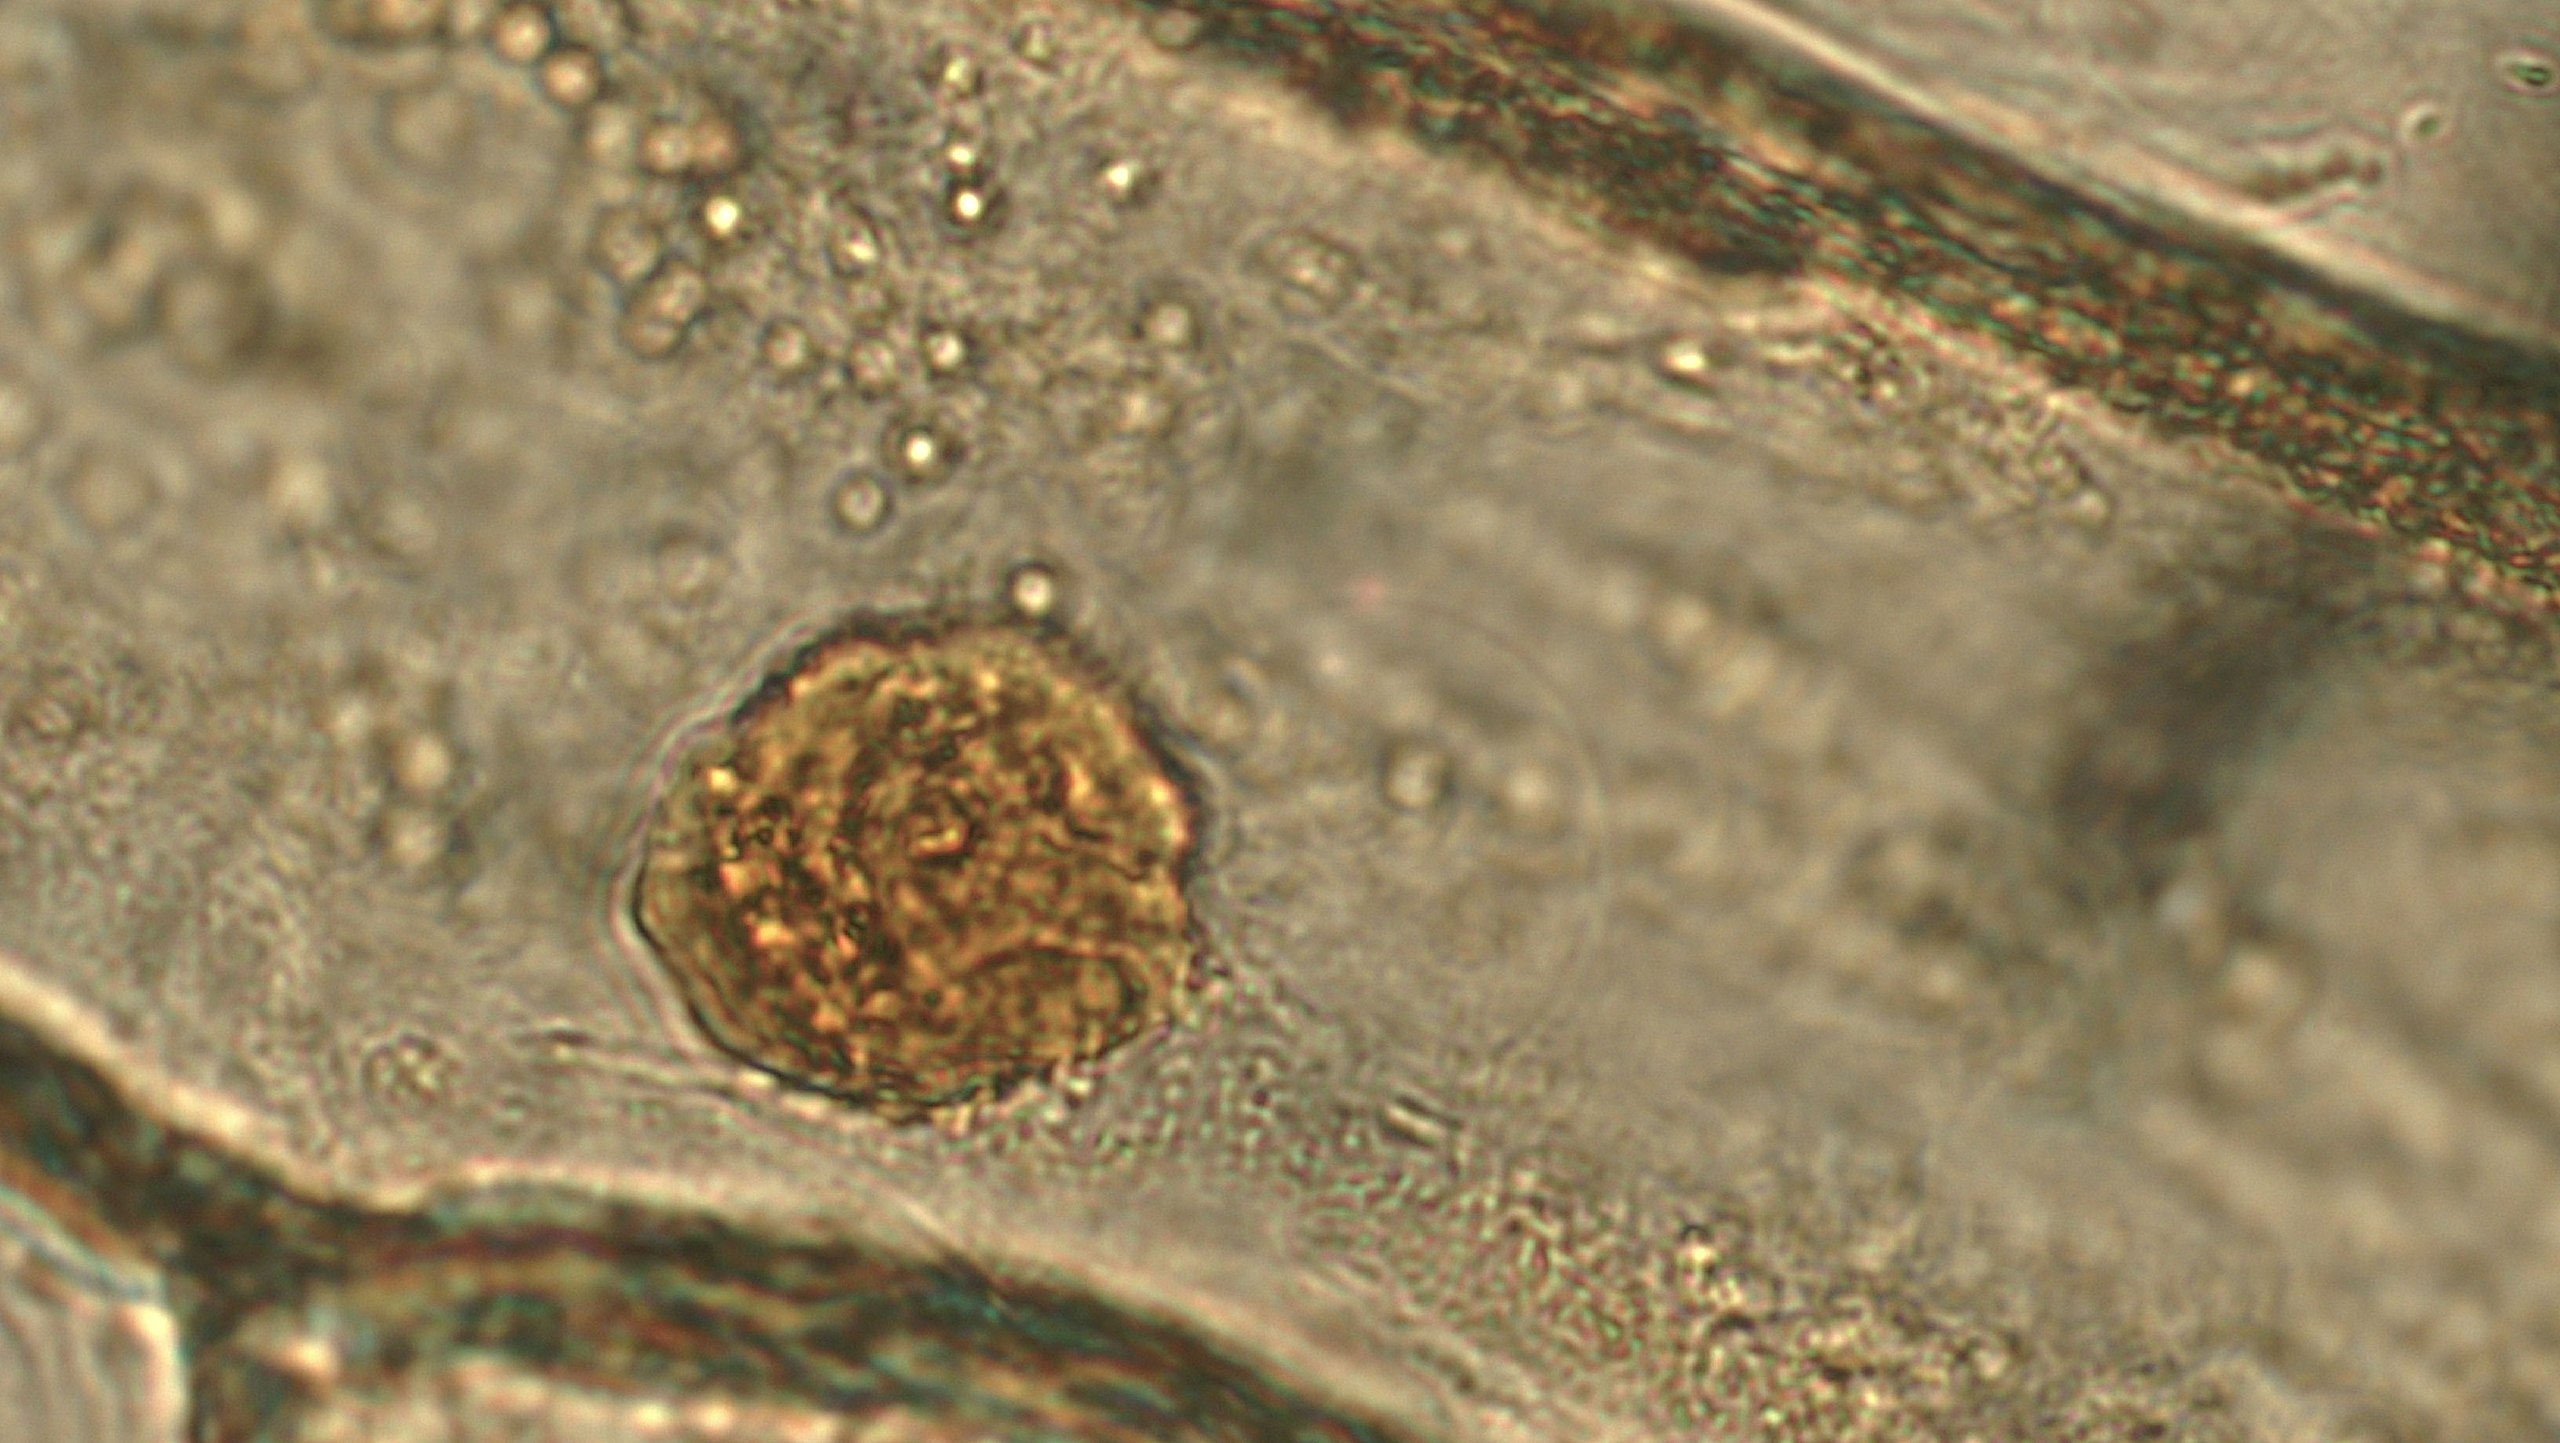 A boxy onion cell with no visible components except a large, globose nucleus